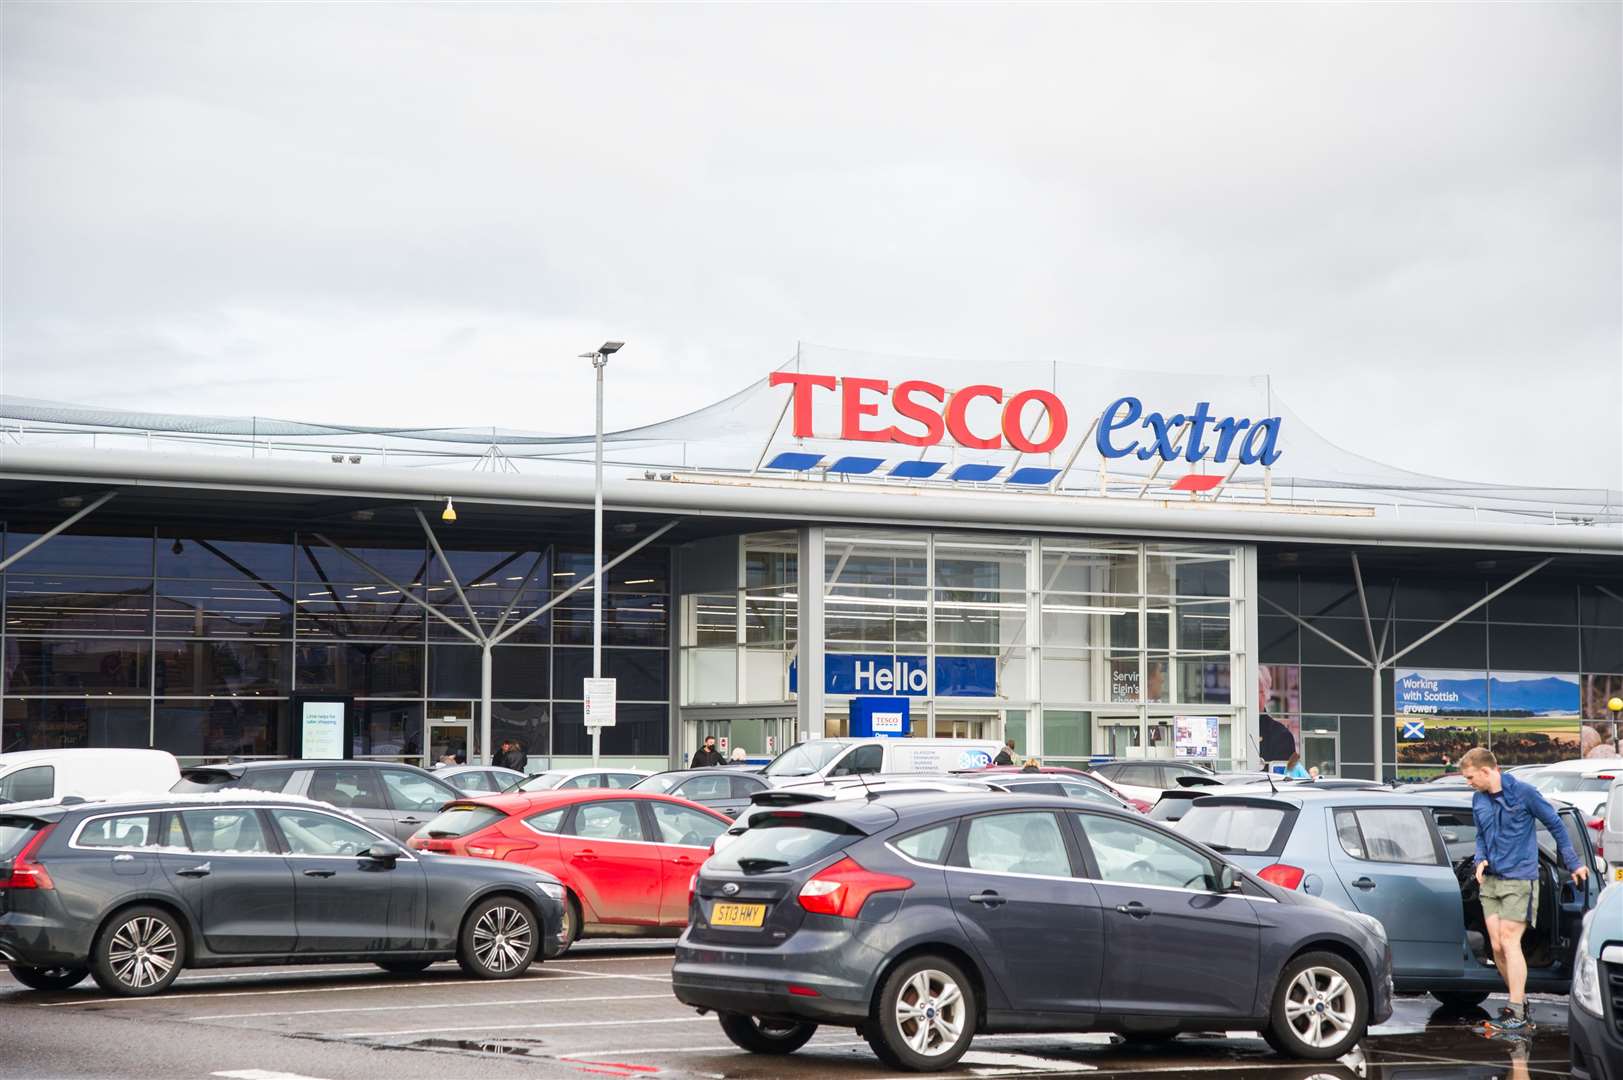 Tesco Elgin where shoppers have helped contribute money for three UK health charities.